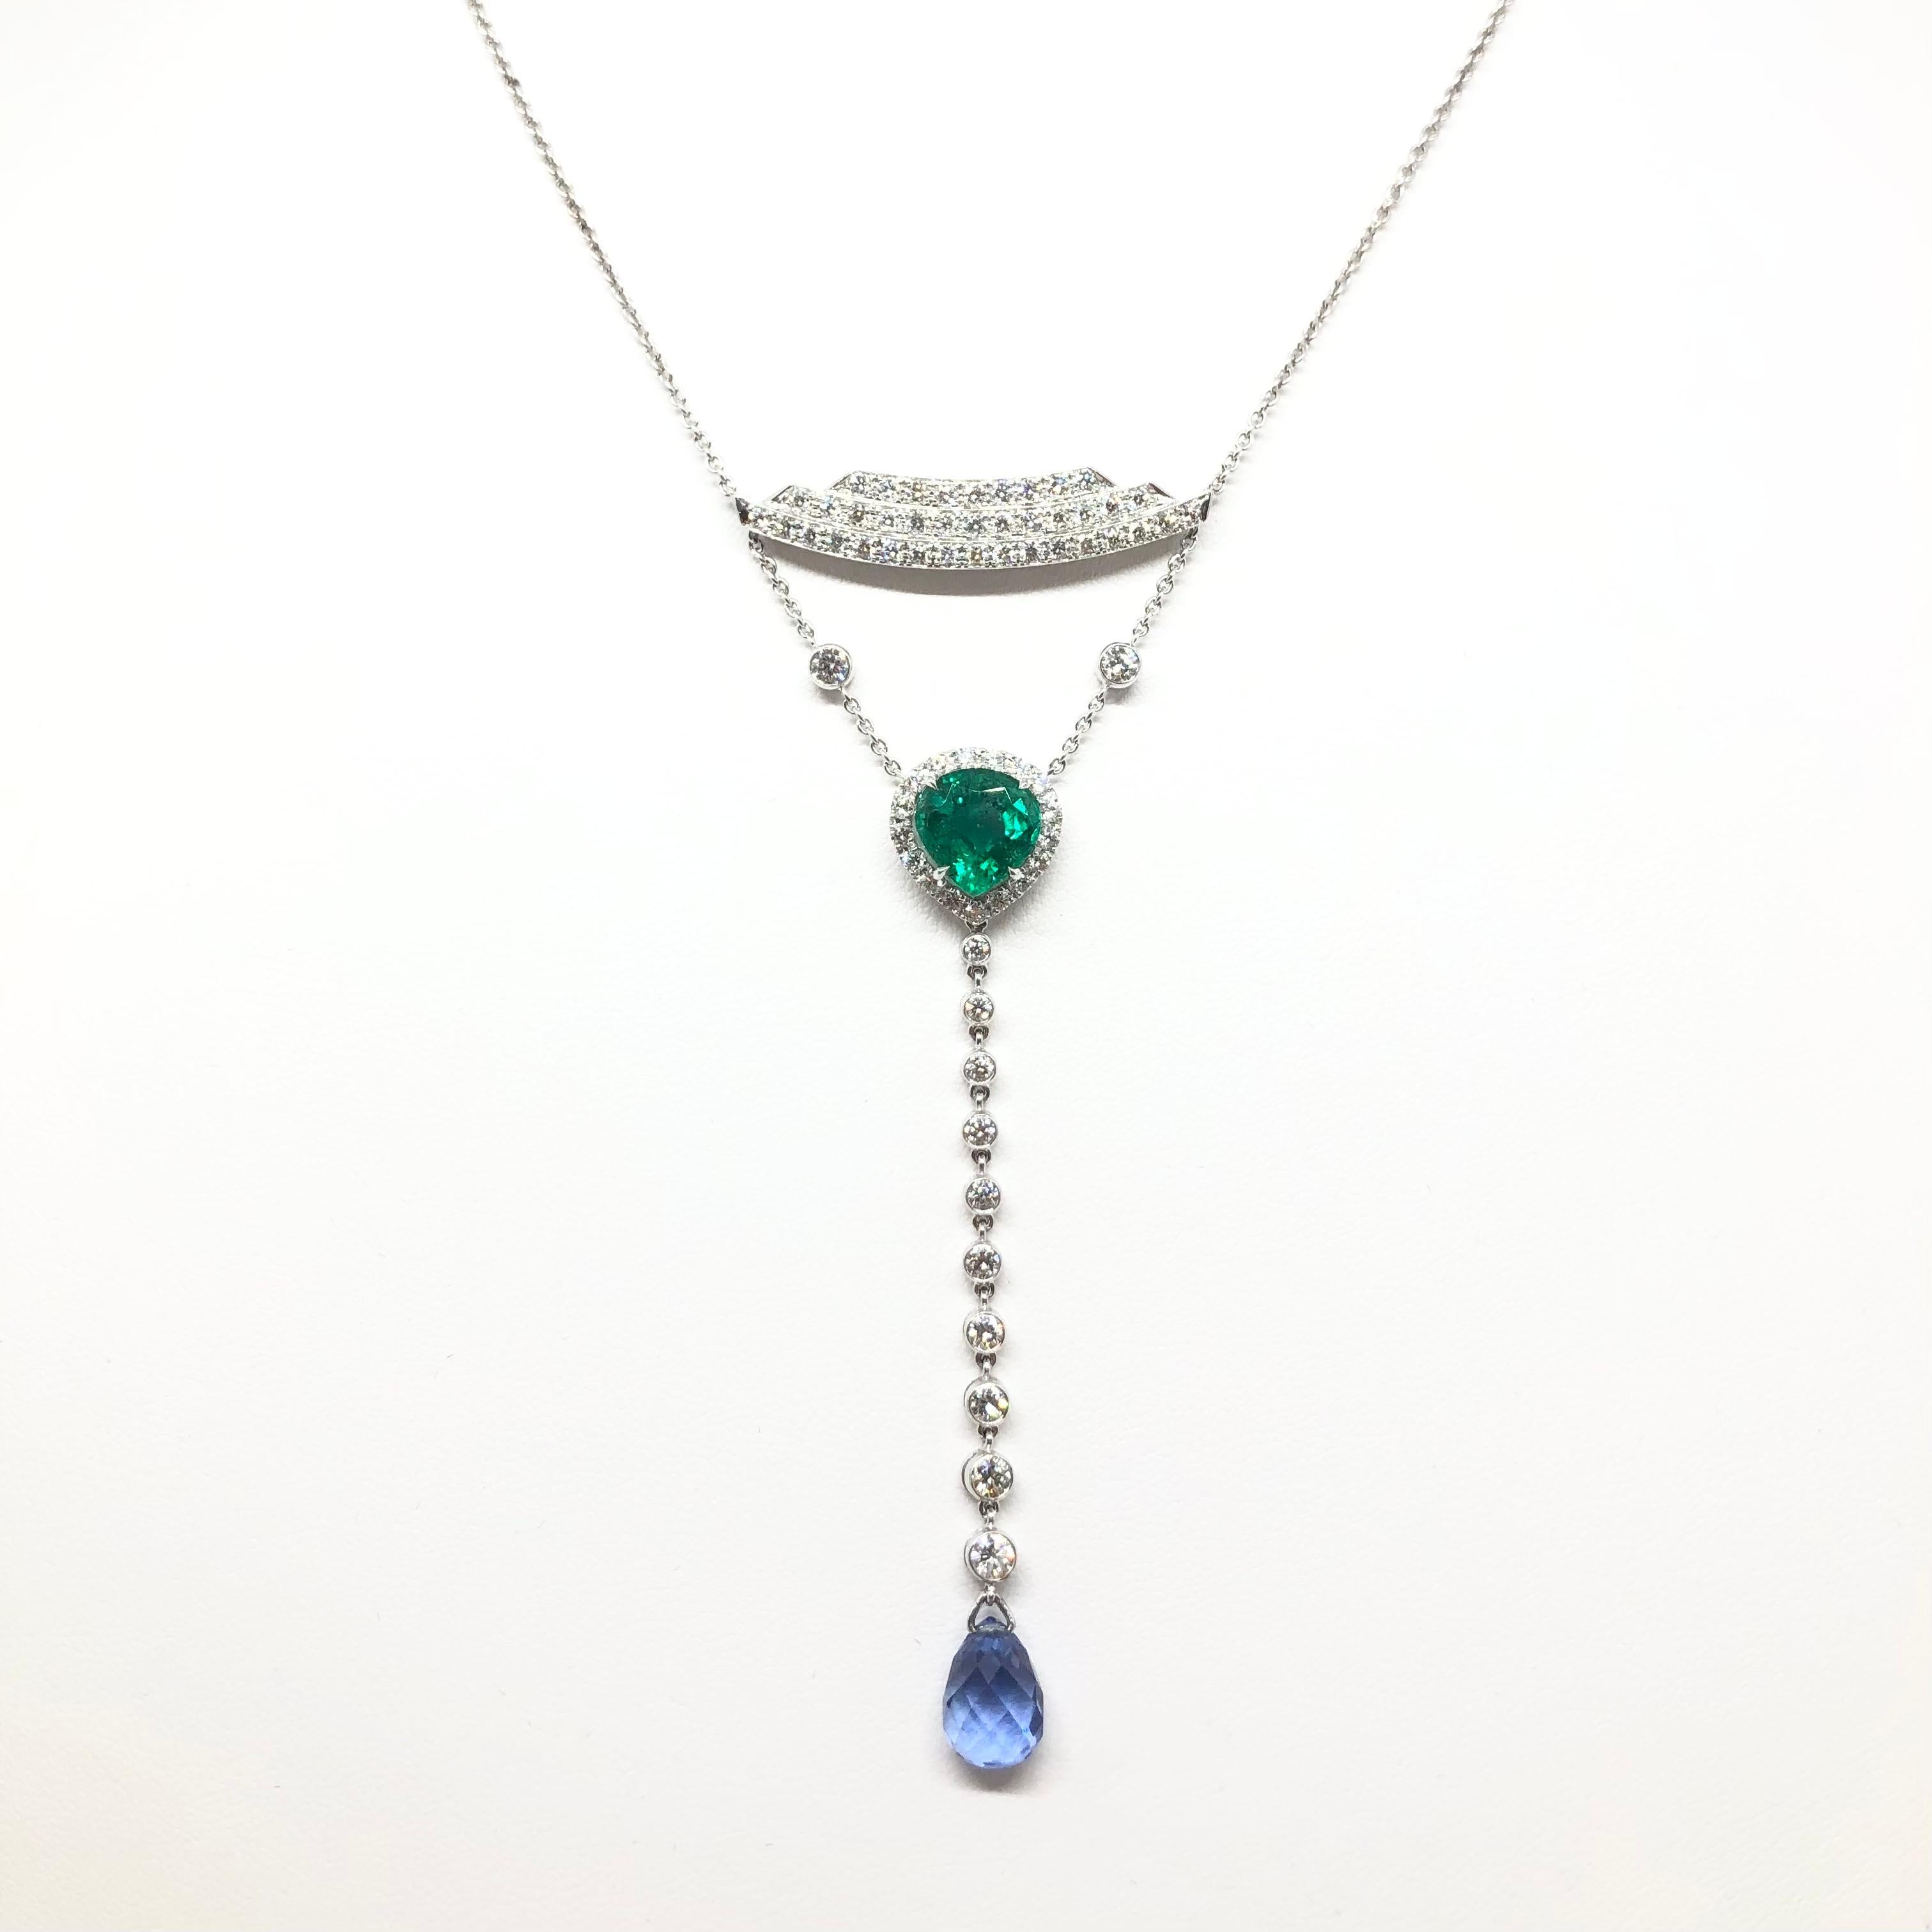 Emerald 3.06 carats, Blue Sapphire 4.74 carats and Diamond in 18 Karat White Gold Settings

Width: 10.5 cm 
Length: 43.0 cm
Total Weight: 13.32 grams

